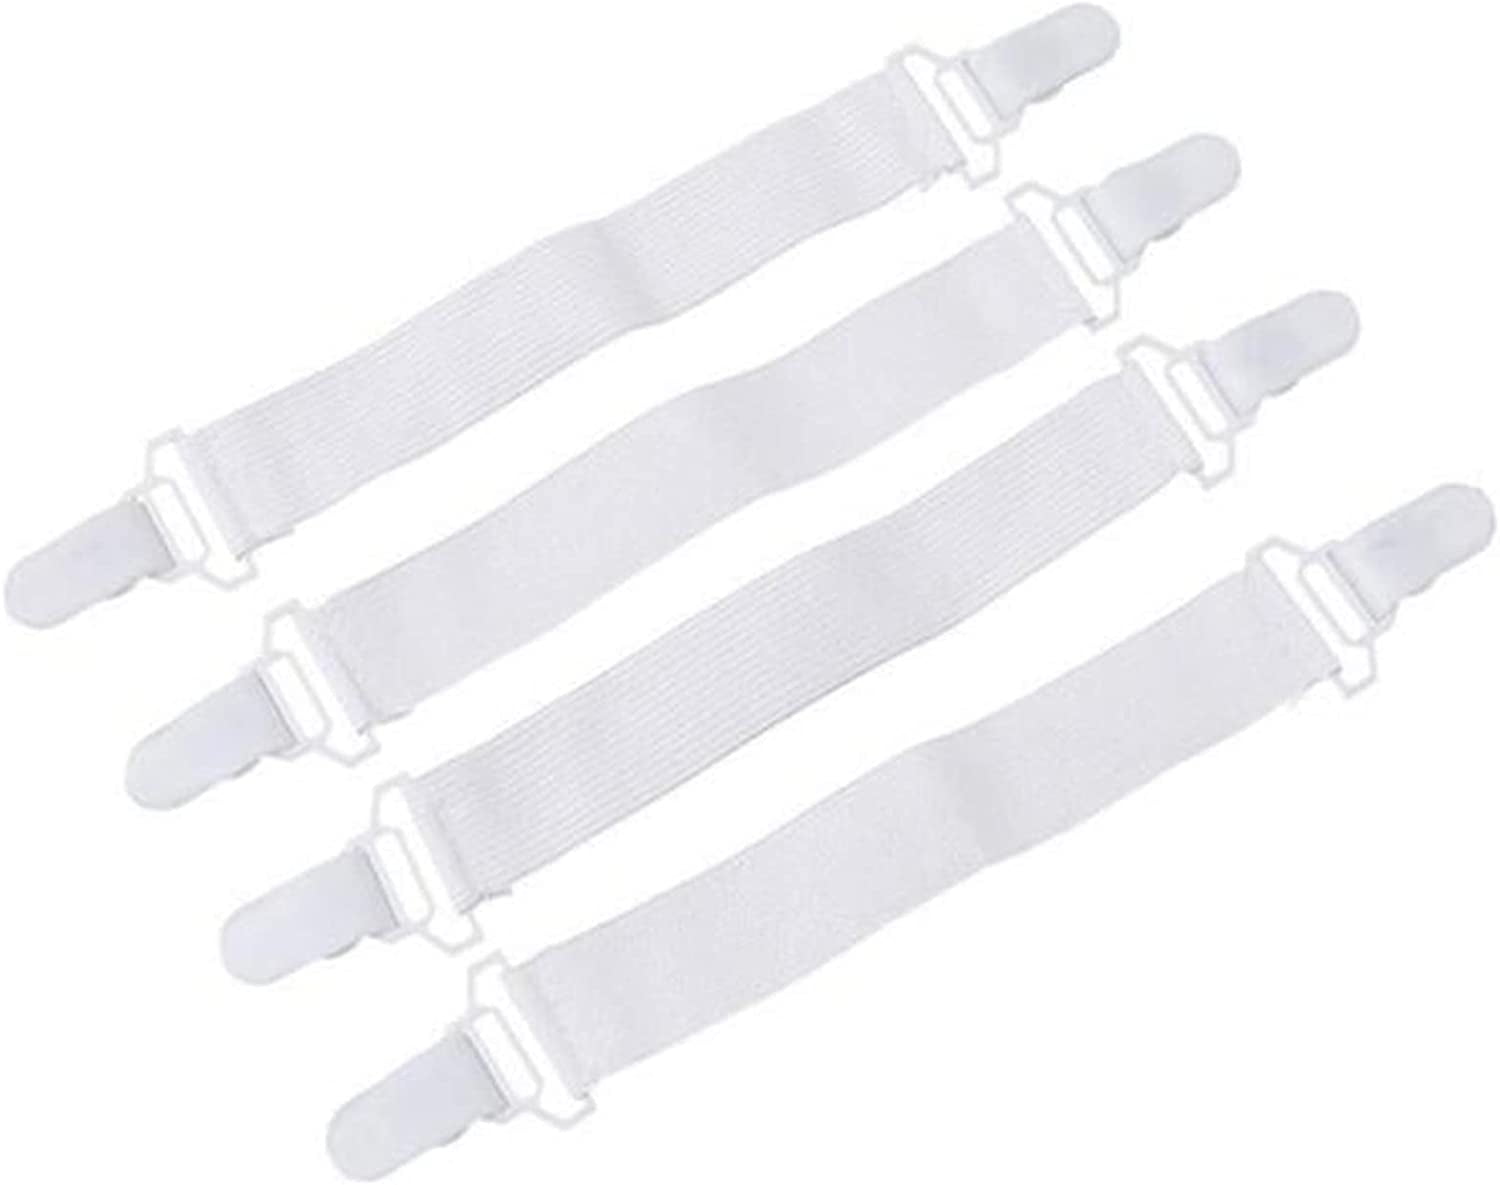 Sheet Straps Bed Sheet Holder Straps, Fitted Sheet Clips Adjustable Elastic  Crisscross Suspenders Bedding Accessories Bed Sheet Fasteners for Corners,  Fit Round…